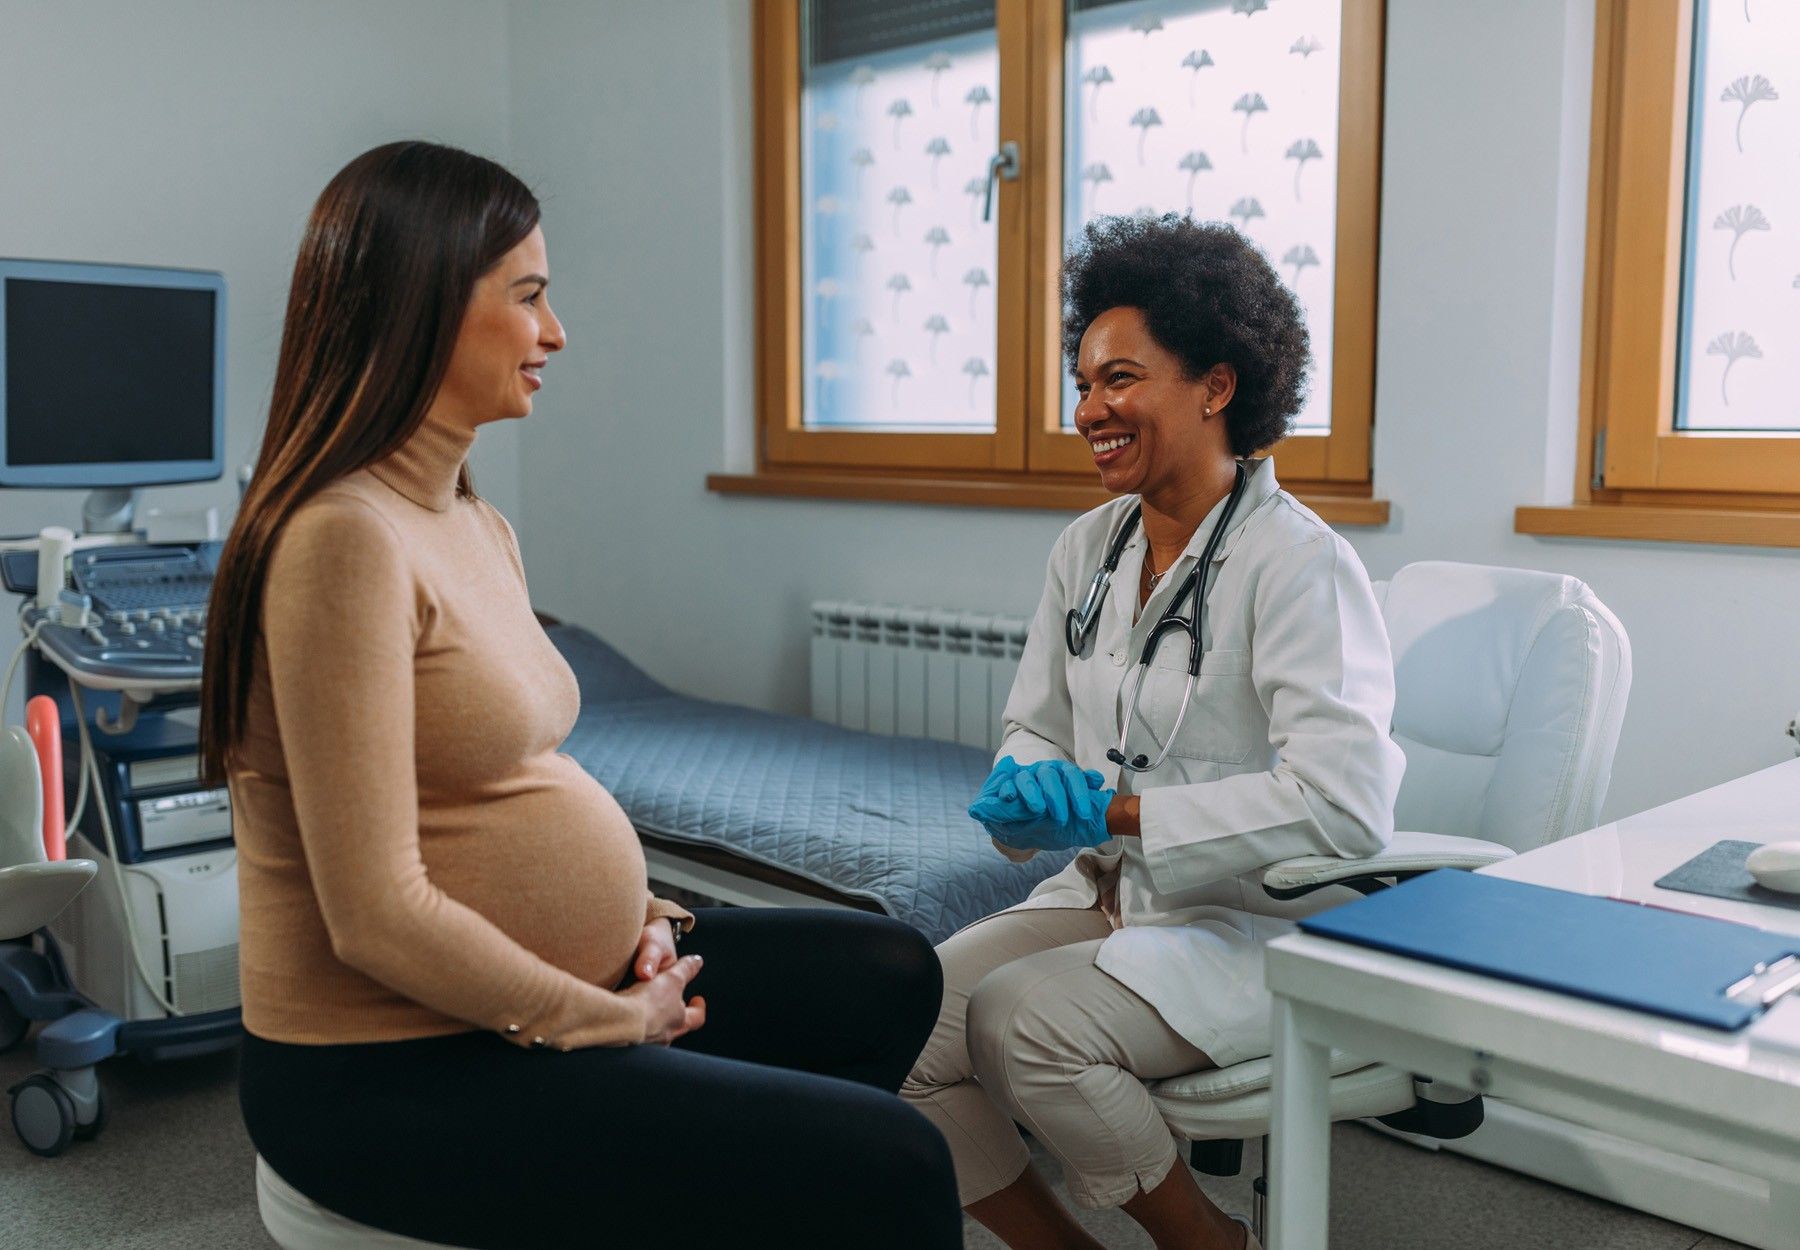 A pregnant woman during a routine check up with her doctor at hospital